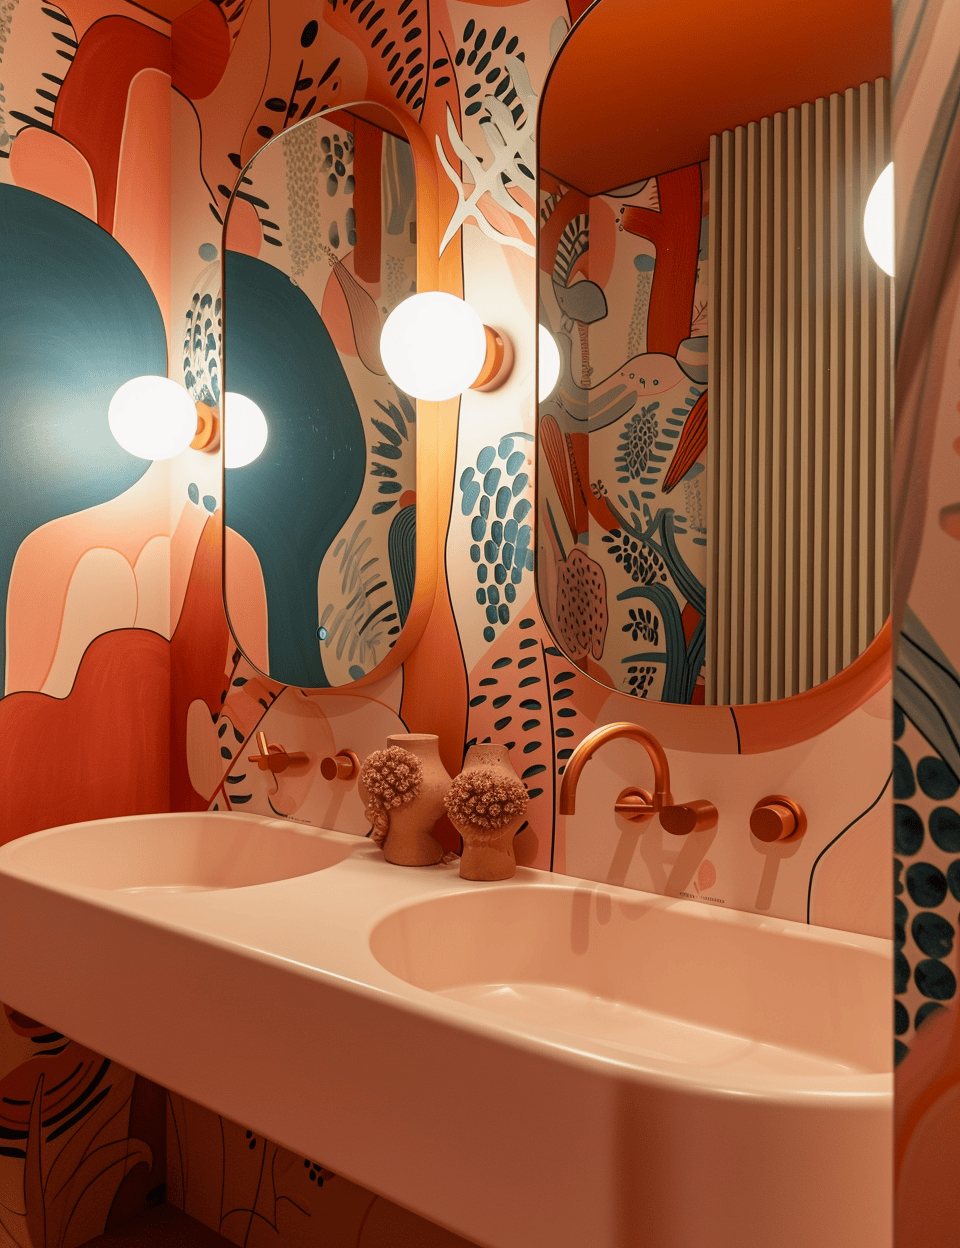 Art Deco bathroom illuminated by luxurious lighting, creating a classic ambiance with a vintage touch